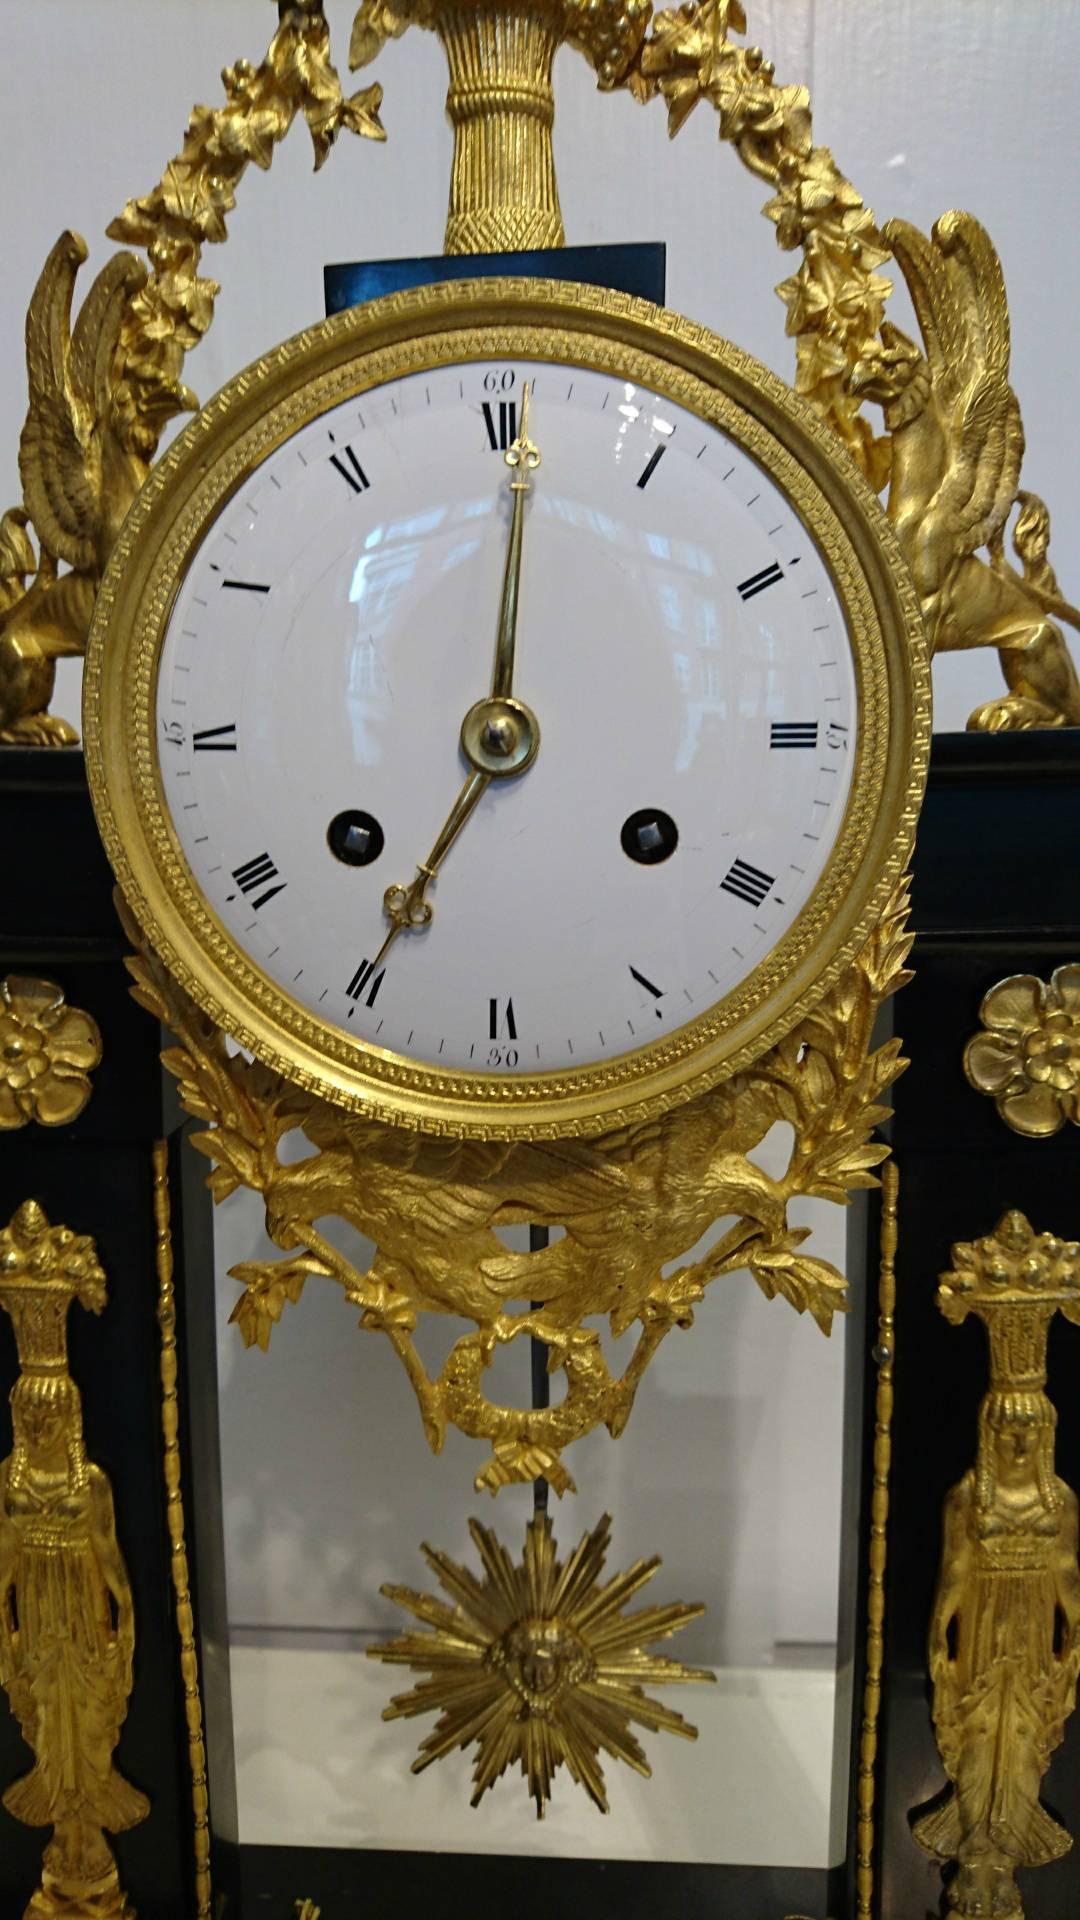 First Empire French portico clock, circa 1800.

This stunning early 19th century clock is an excellent example of the portico genre clocks of the Empire period. The high grade silk suspension movement, striking hours and half hours on a